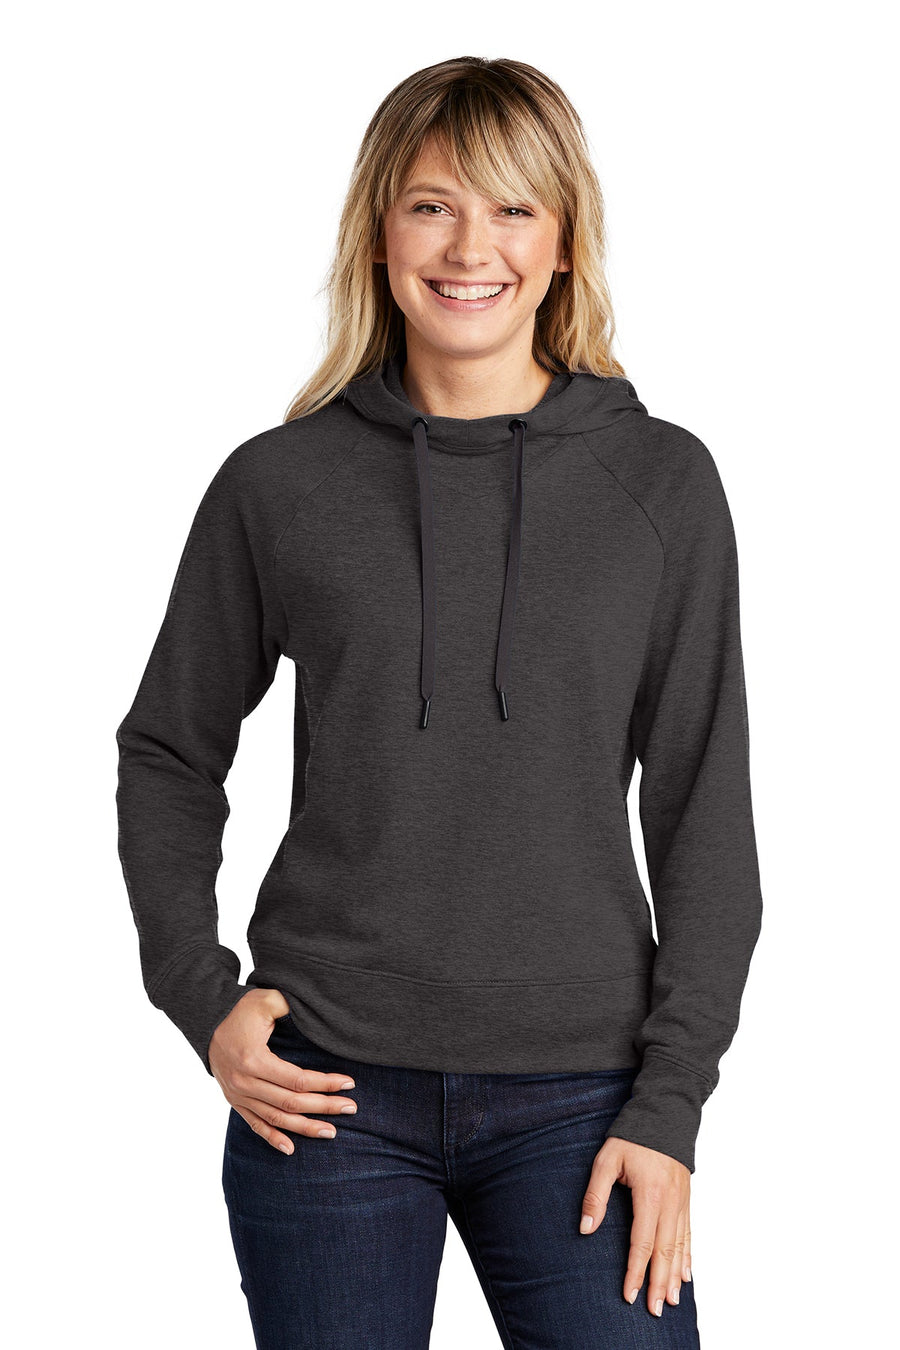 Ladies Lightweight French Terry Pullover Hoodie - Clay Soccer